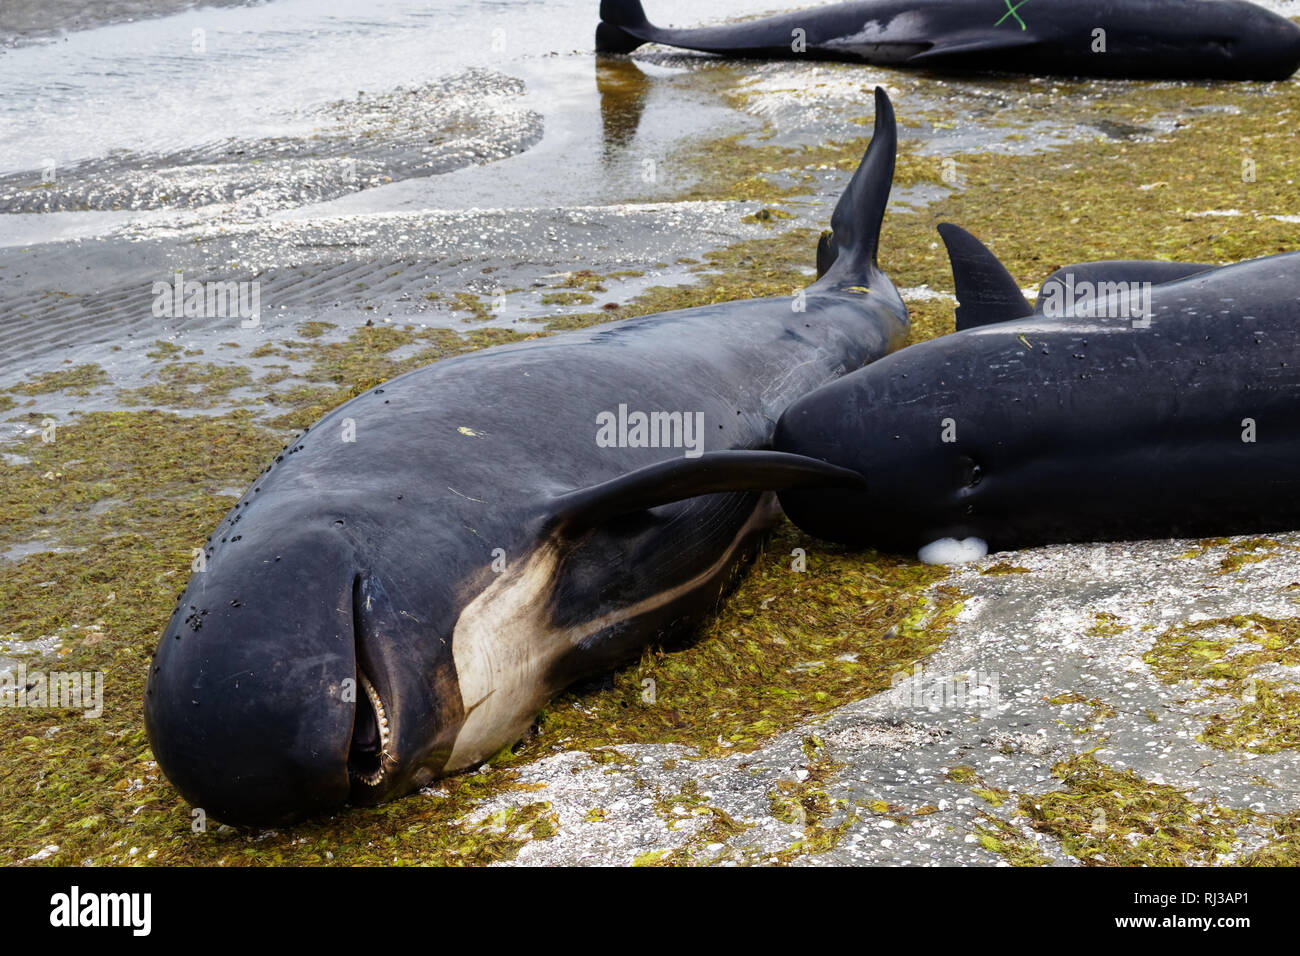 Stranded and dead pilot whales beached on Farewell Spit at the northern tip of New Zealand's South Island. Stock Photo